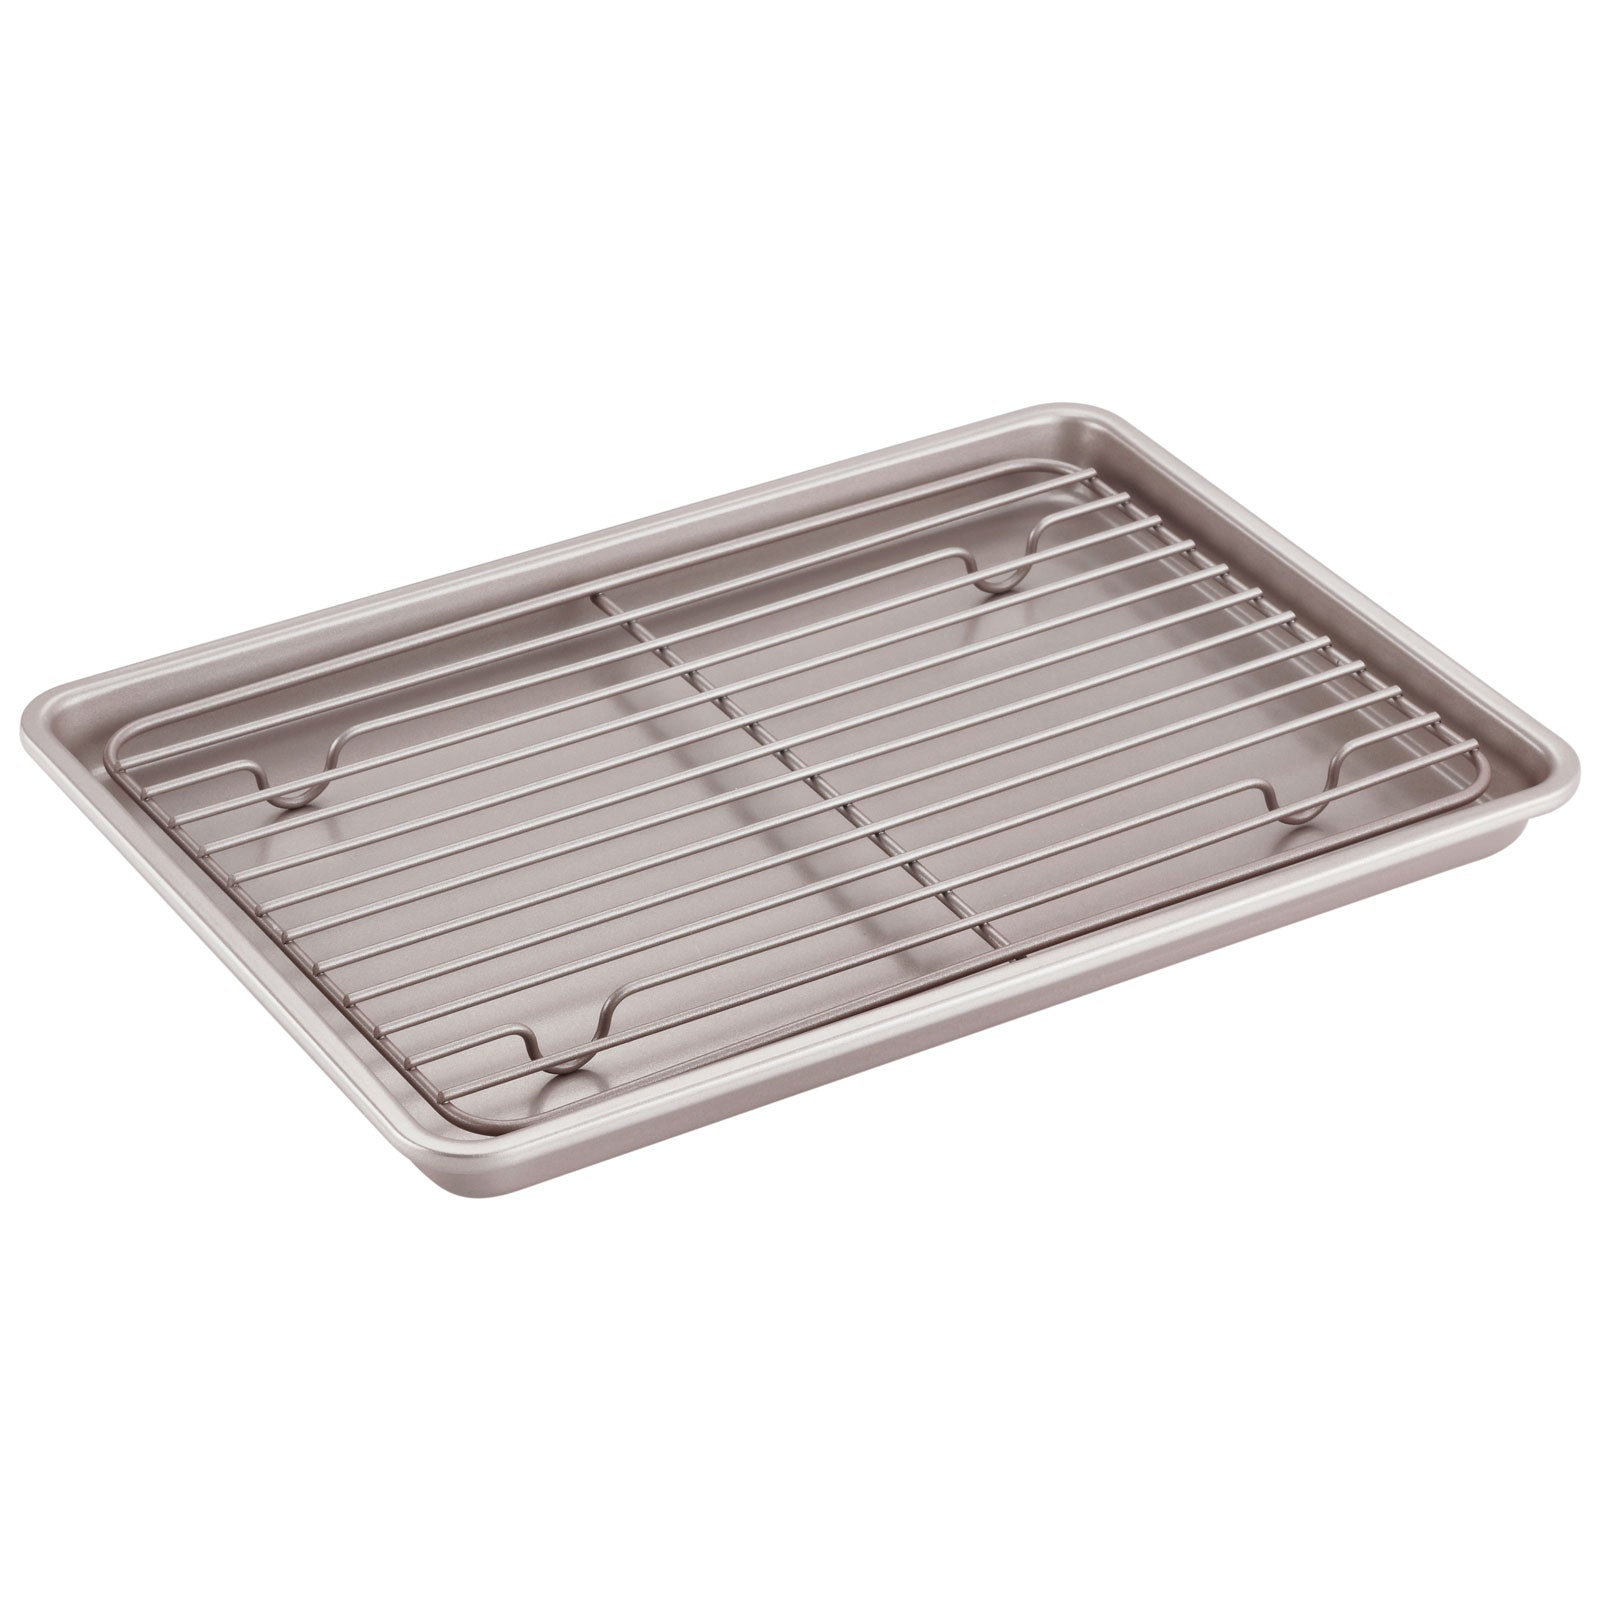 BAKEWARE Tagged Roasting Pans - CHEFMADE official store